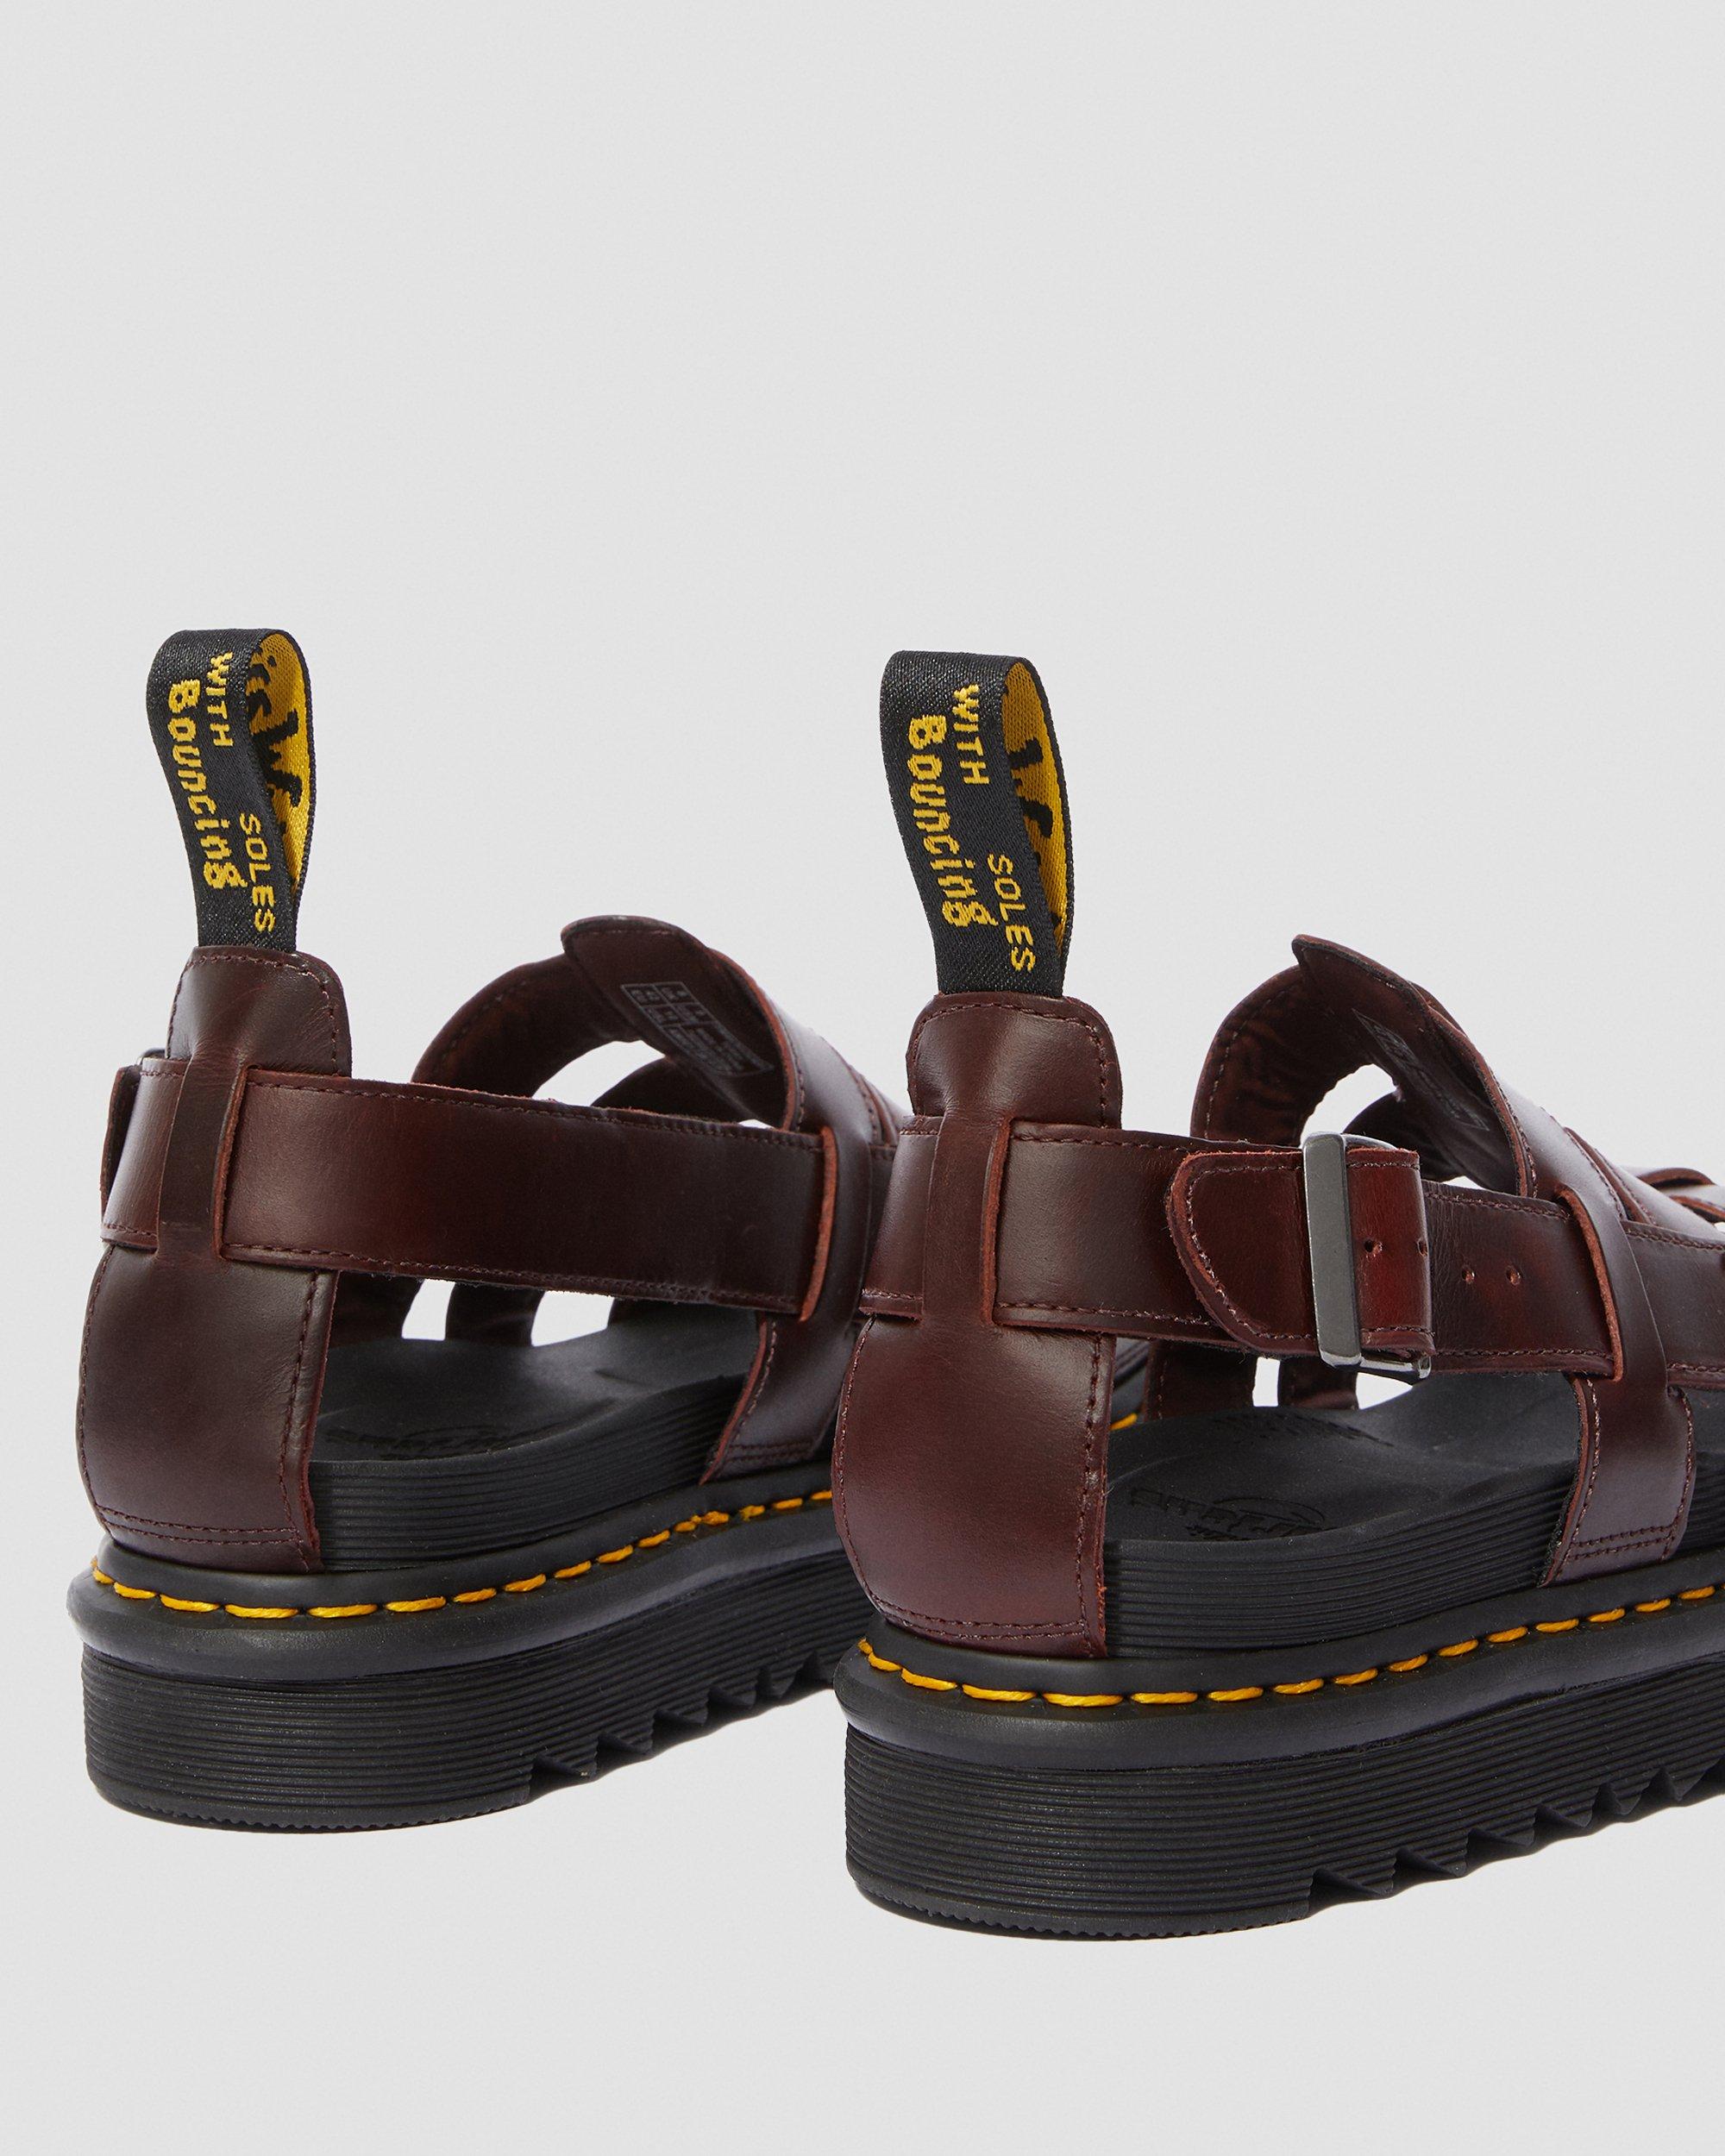 Terry Leather Strap Sandals in Brown